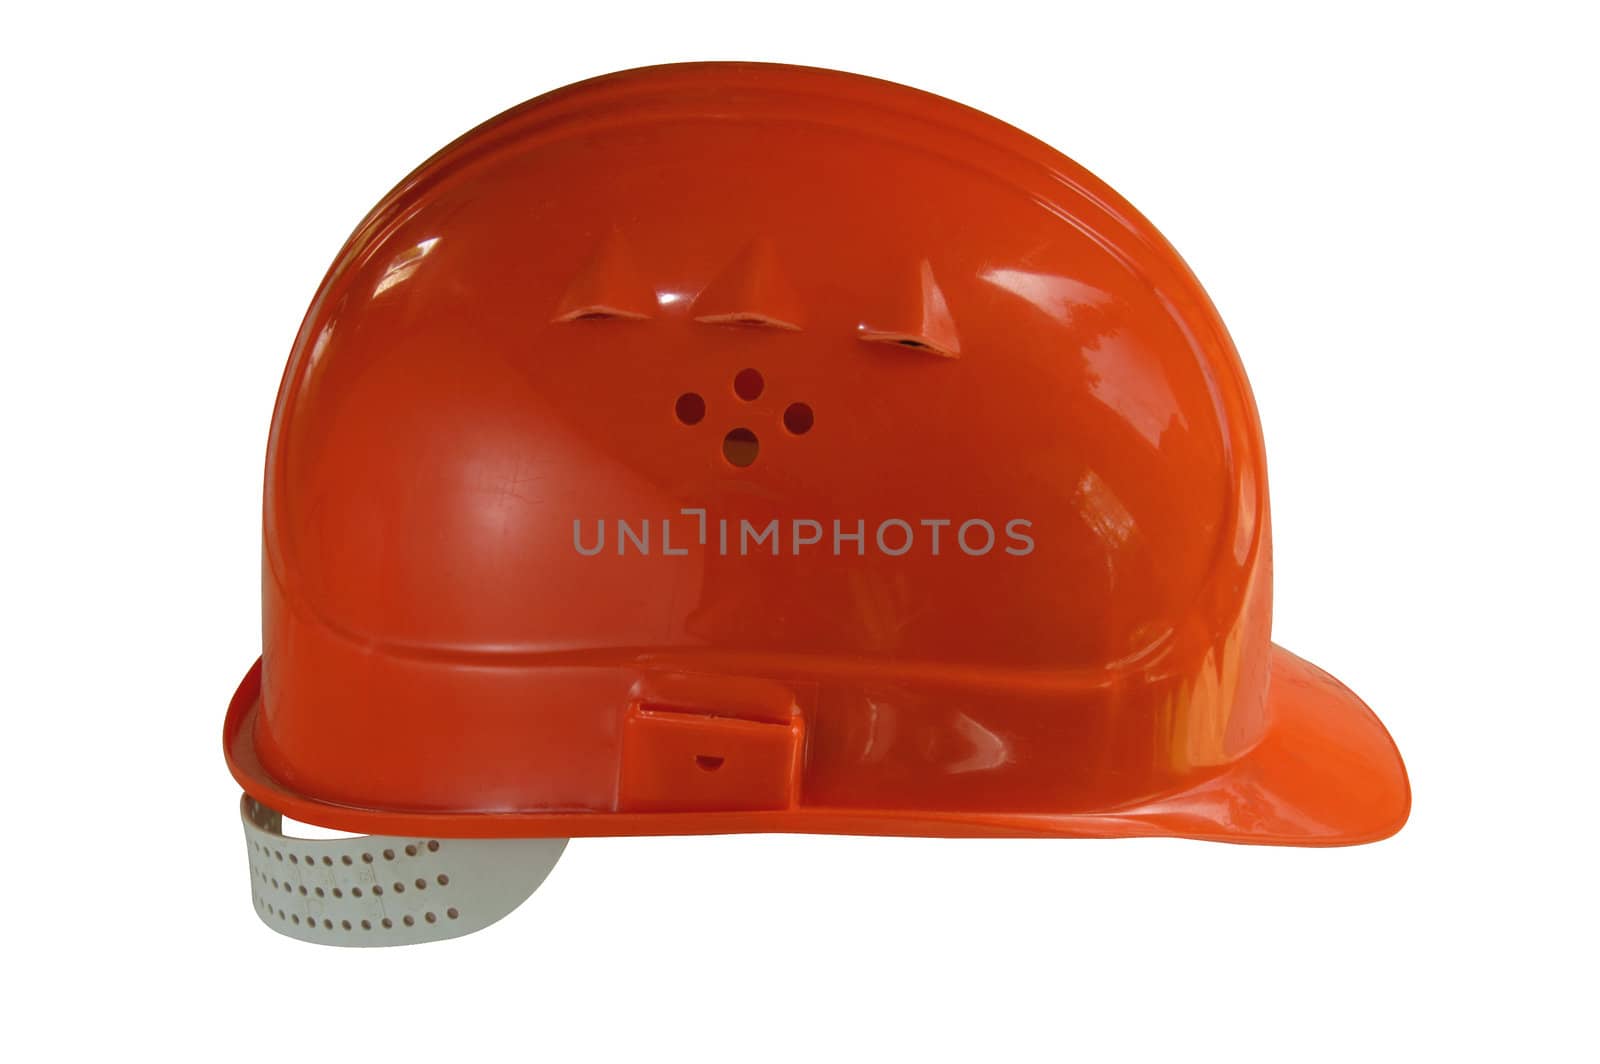 Safety helmet (with clipping path) by Bateleur